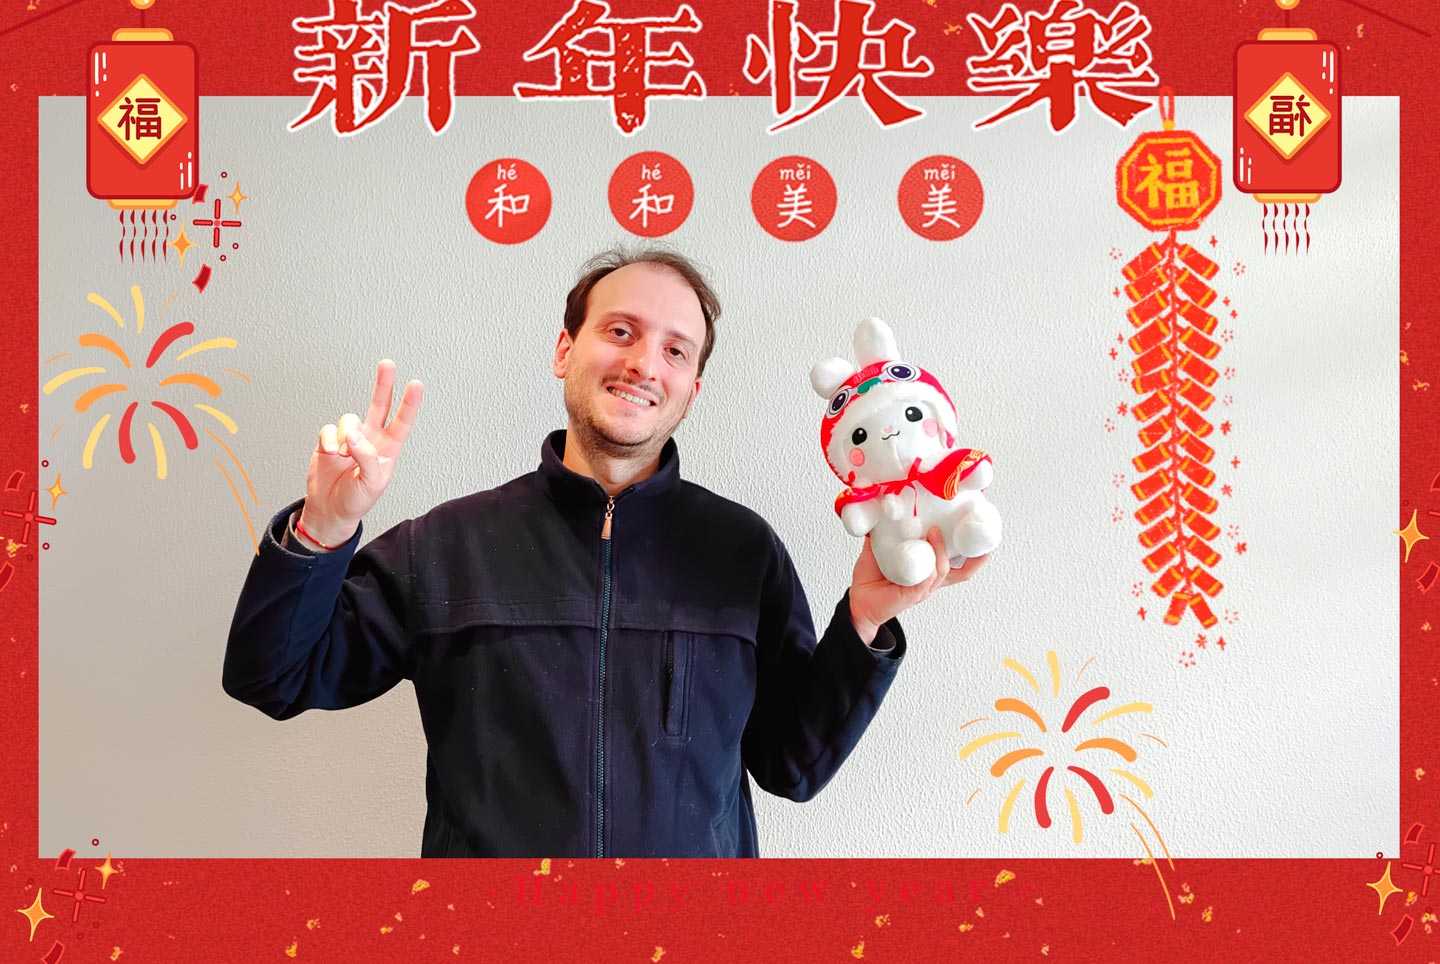 Happy new lunar year of the Rabbit!